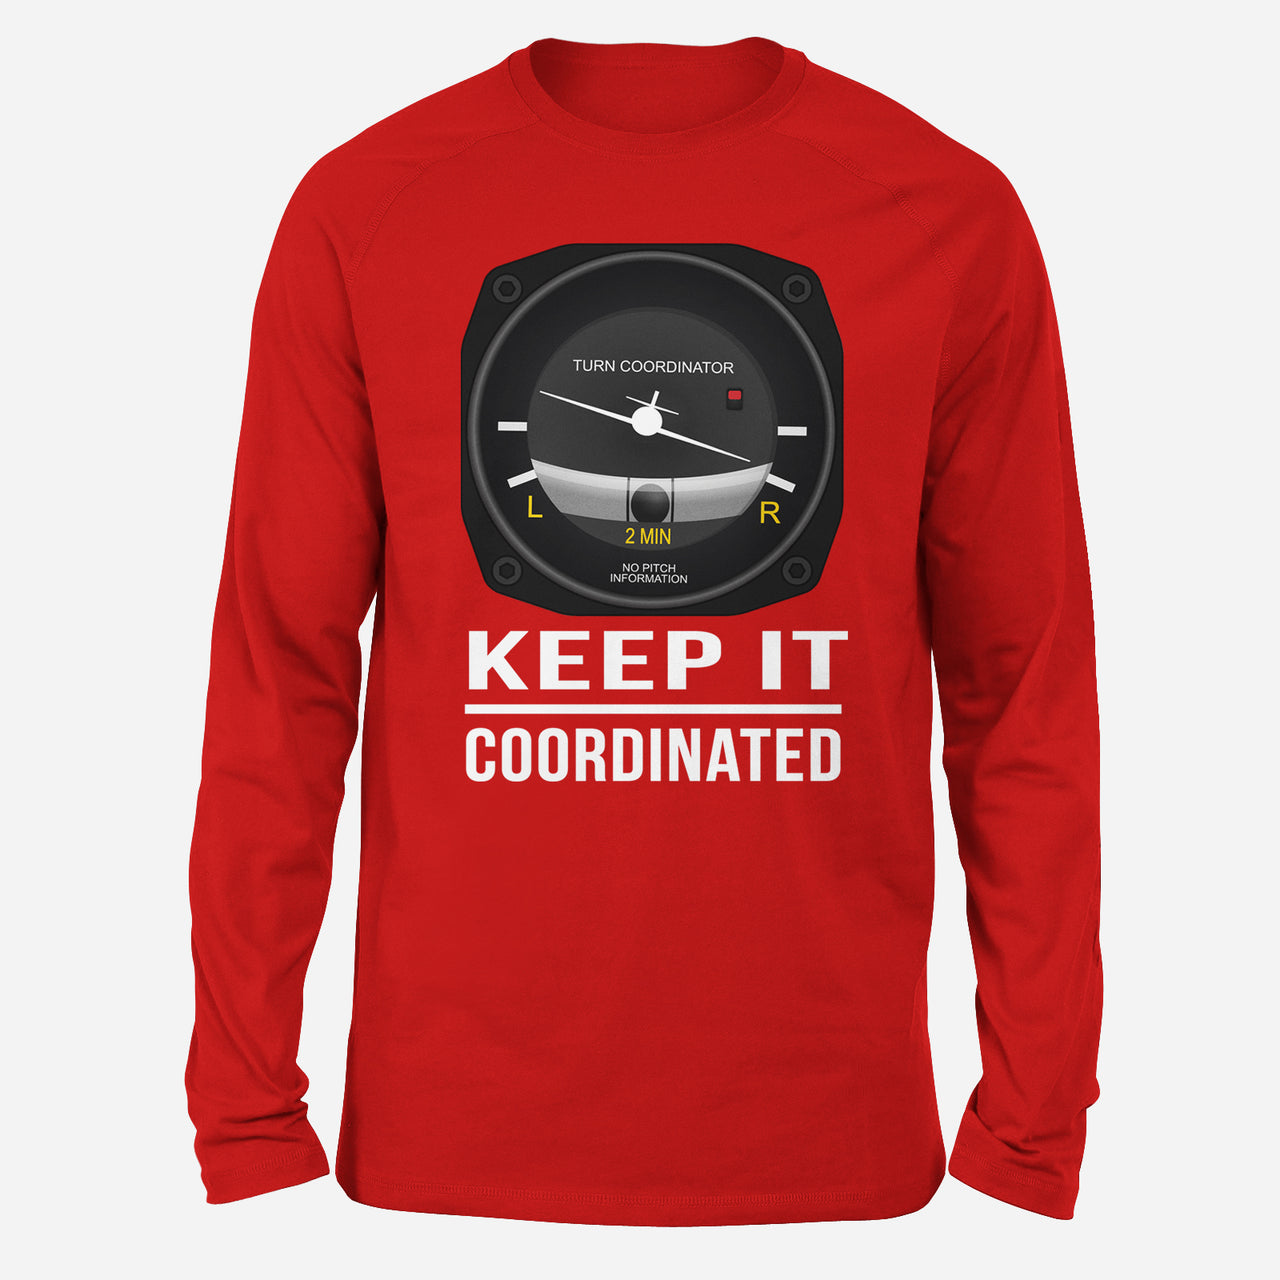 Keep It Coordinated Designed Long-Sleeve T-Shirts